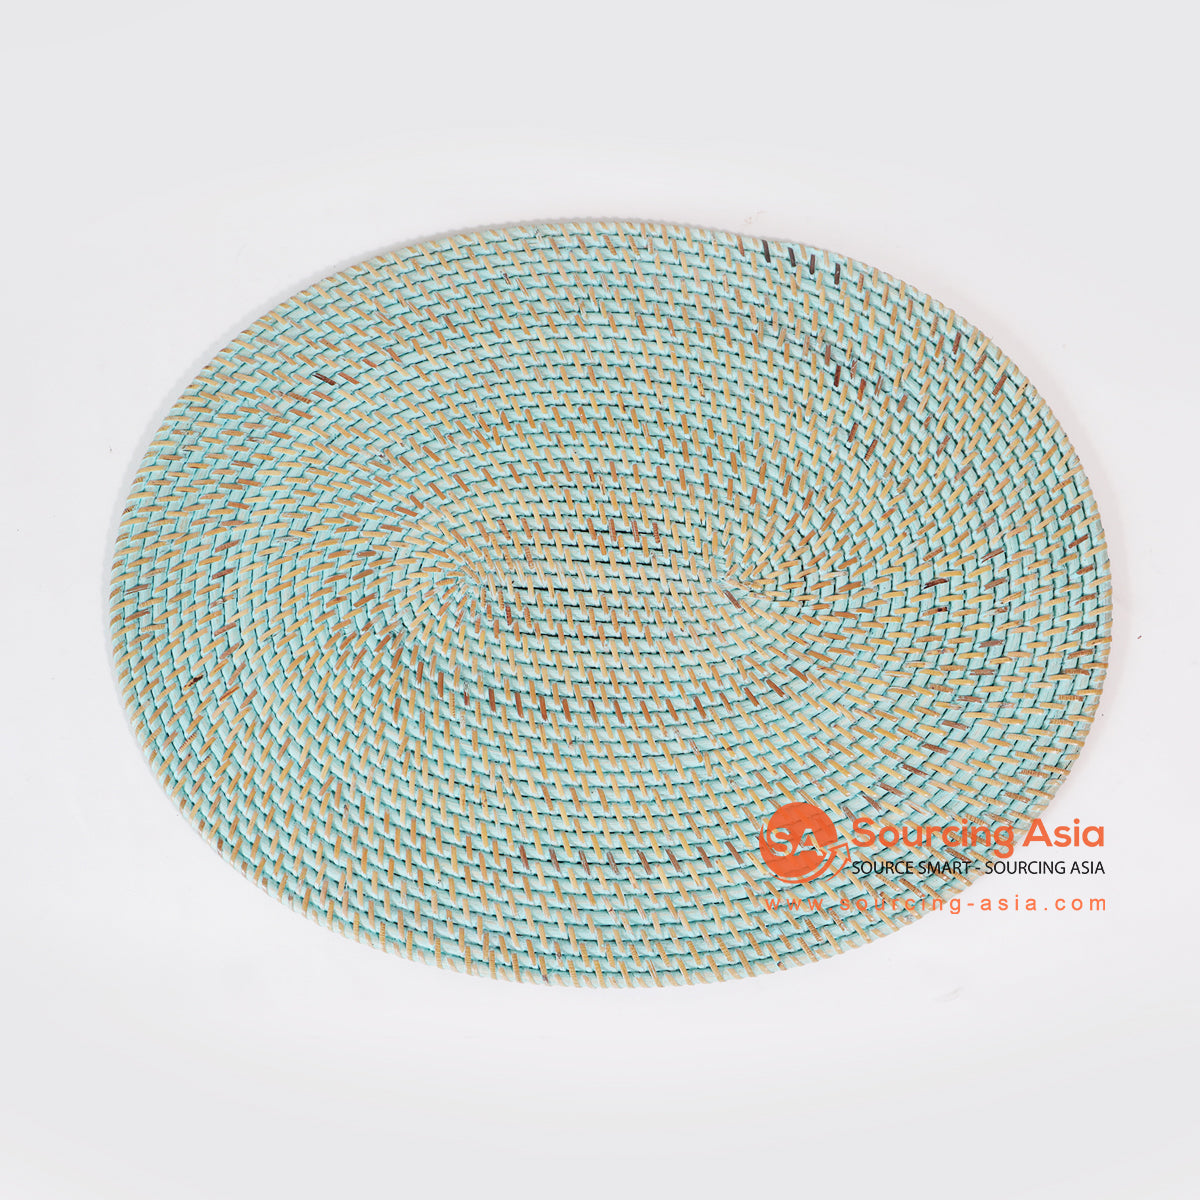 MTIC032-2 TURQUOISE WOVEN RATTAN PLACEMAT